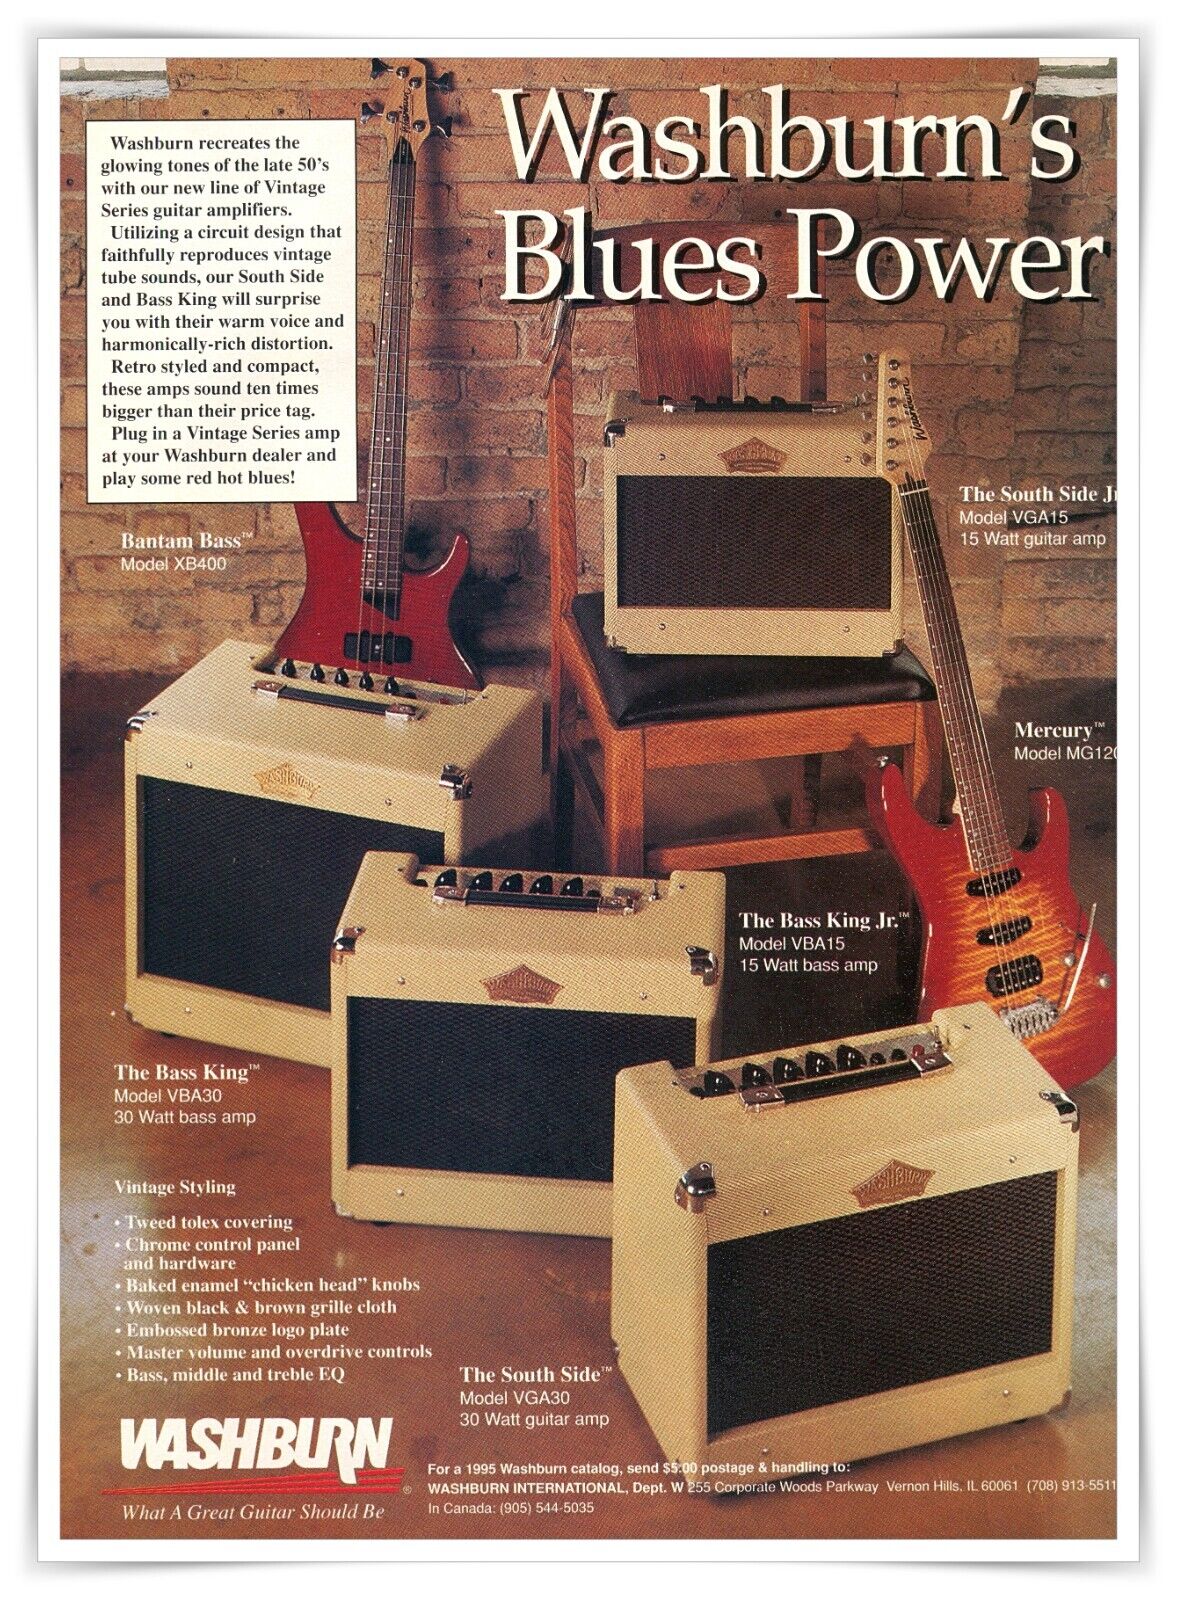 Washburn Vintage Series Guitar Amplifiers Blues Power 1995 Full-Page Magazine Ad